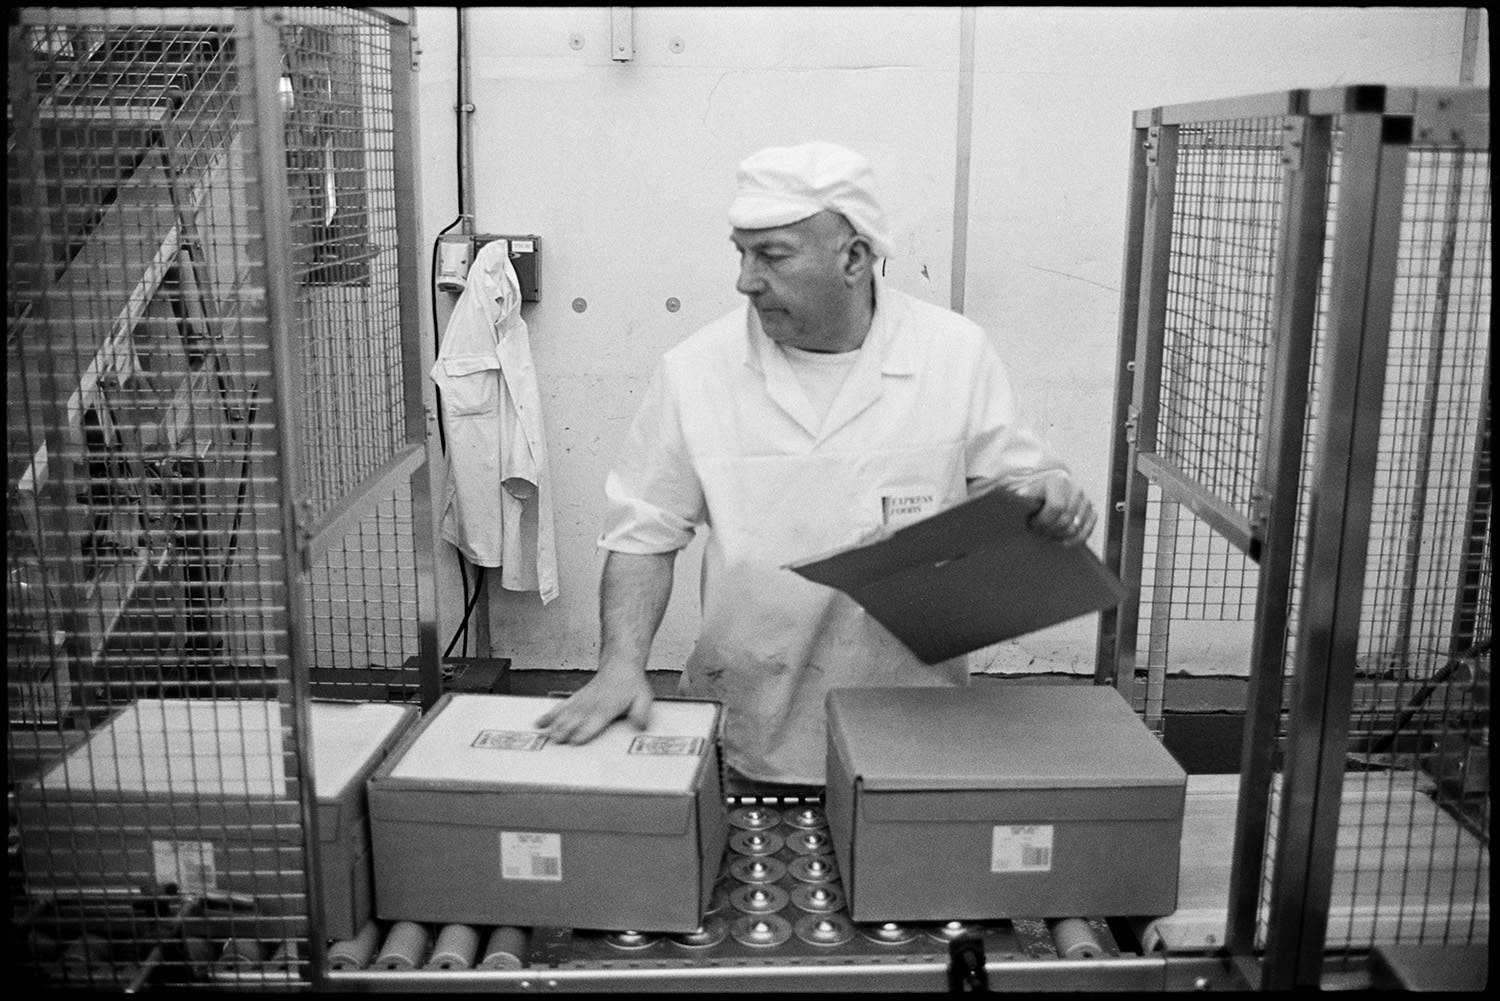 Interior of cheese factory men testing cheese and packing. 
[A man checking boxes of cheese on a conveyor belt at the Dairy Crest North Tawton Cheese Factory.]